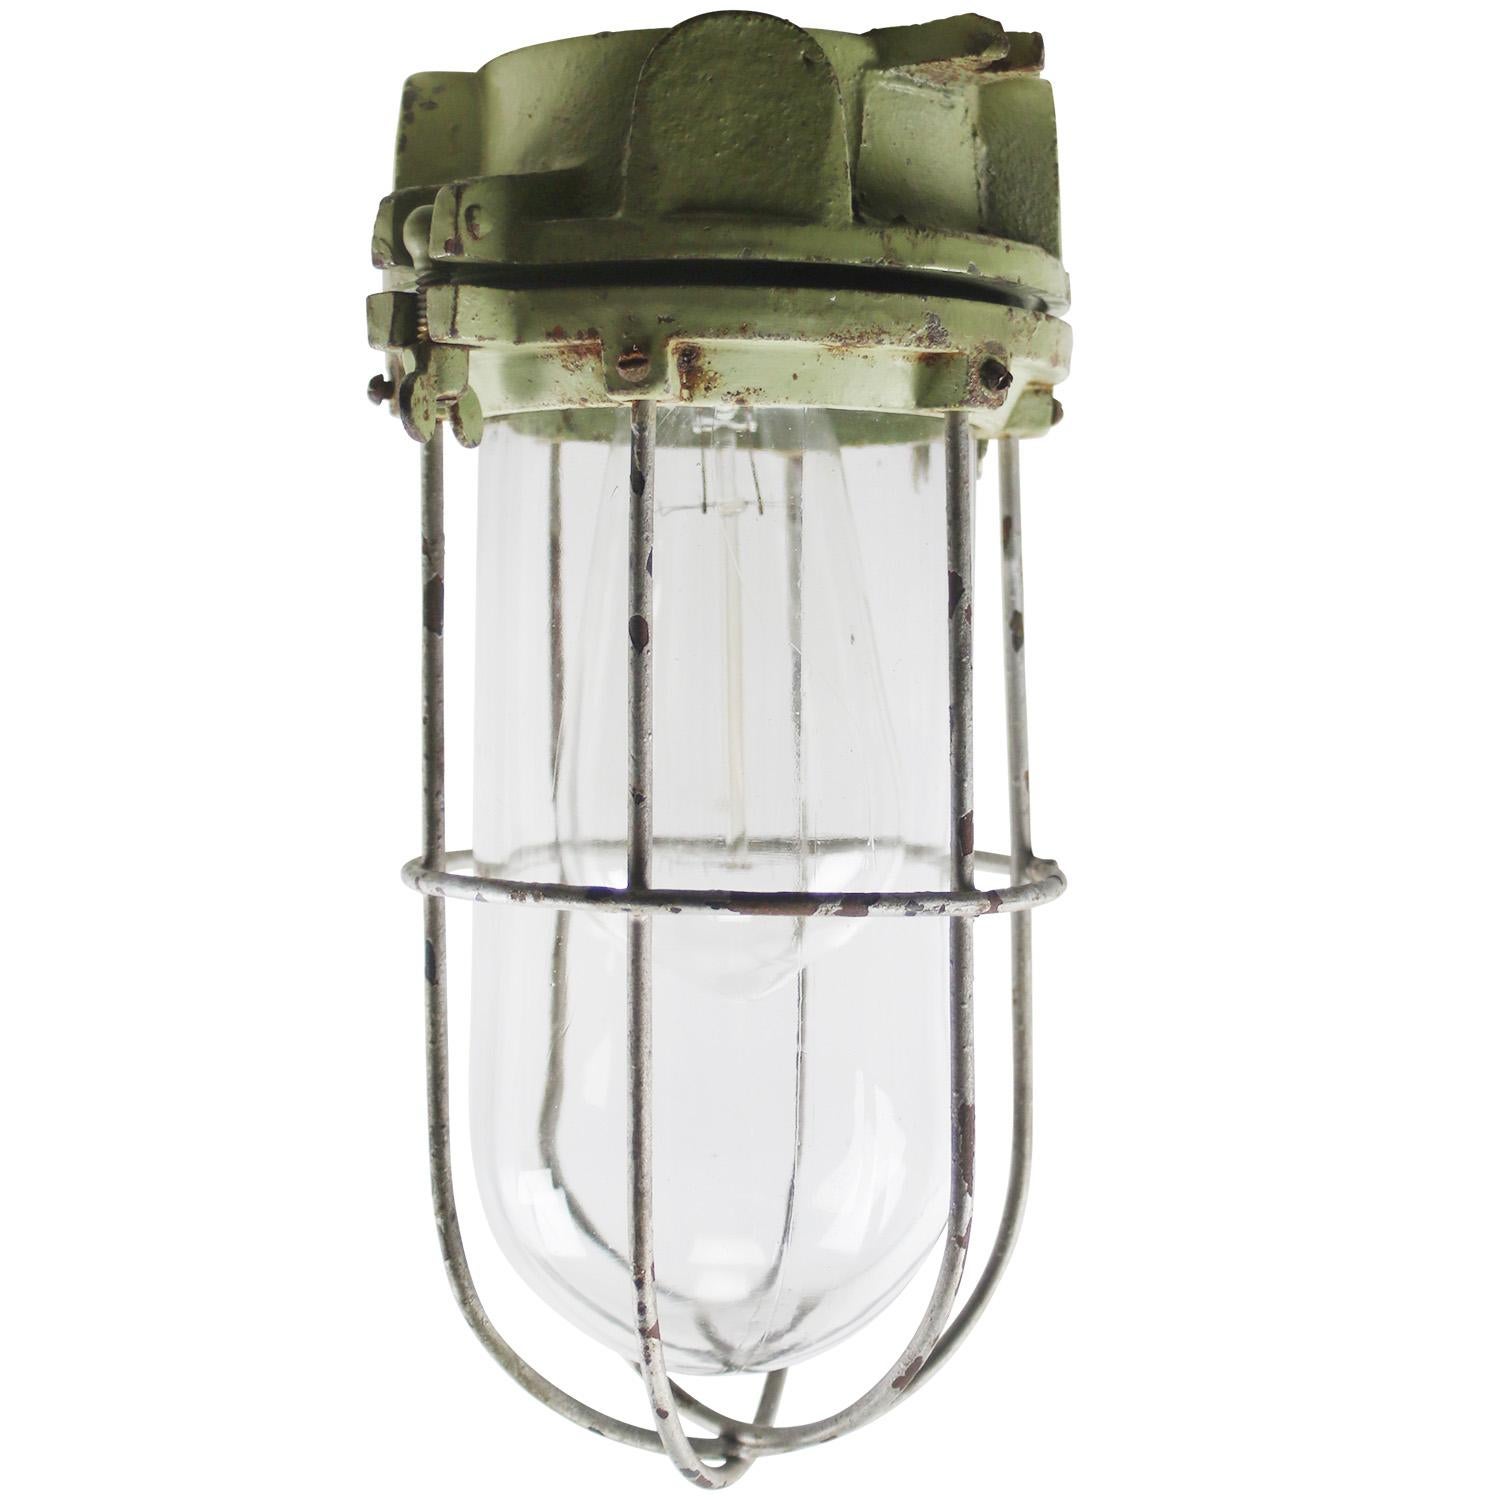 Industria Rotterdam industrial cage light
Green cast iron with clear glass

Weight: 2.40 kg / 5.3 lb

Priced per individual item. All lamps have been made suitable by international standards for incandescent light bulbs, energy-efficient and LED